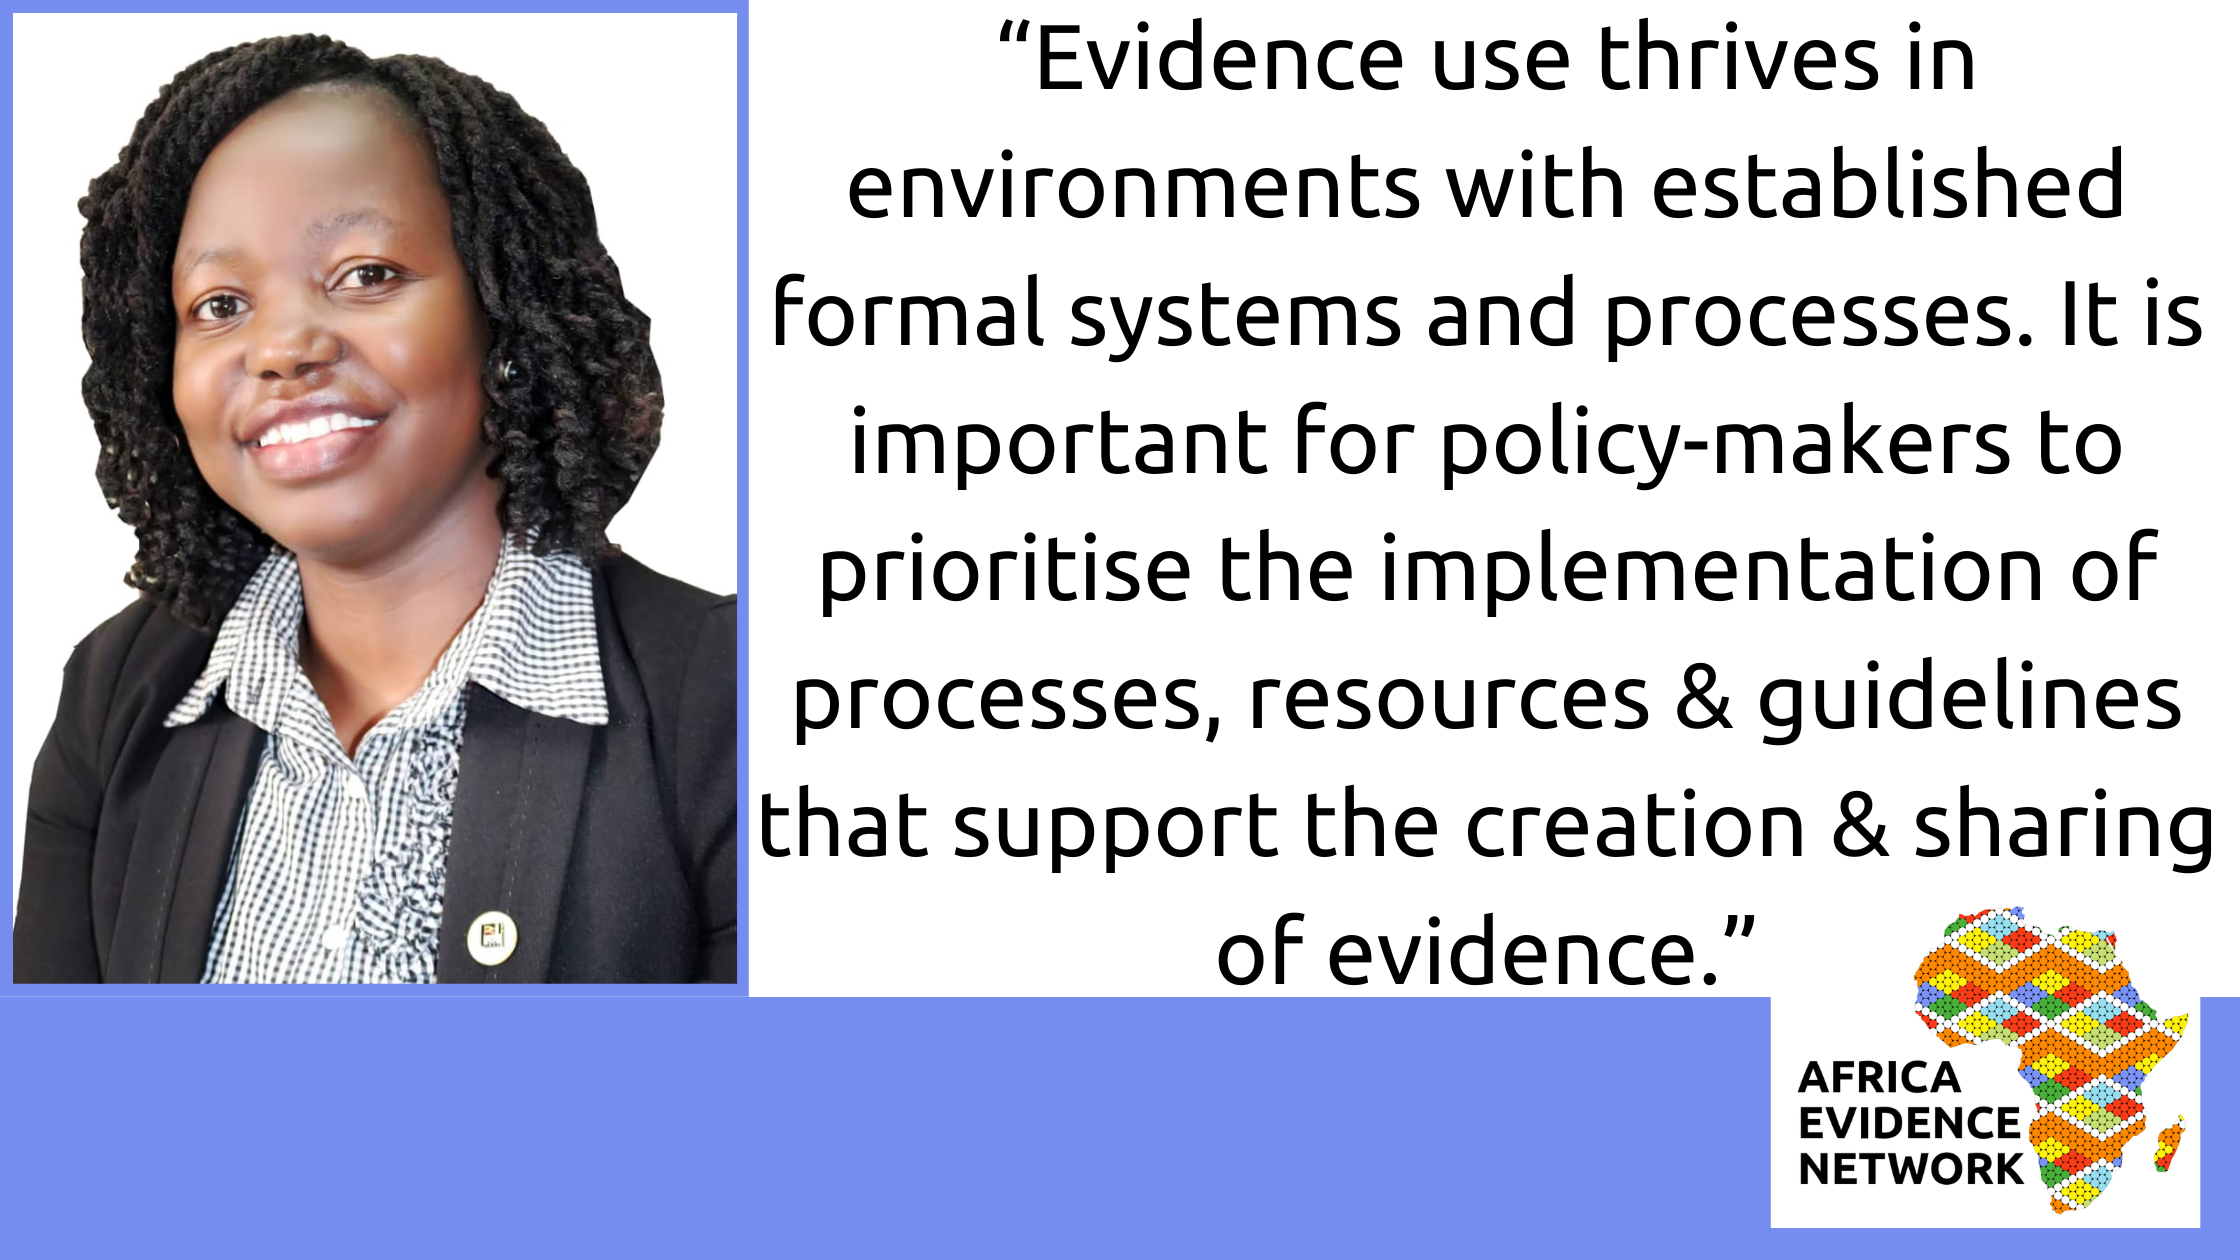 Embedding evidence use in the Ugandan policy-making process